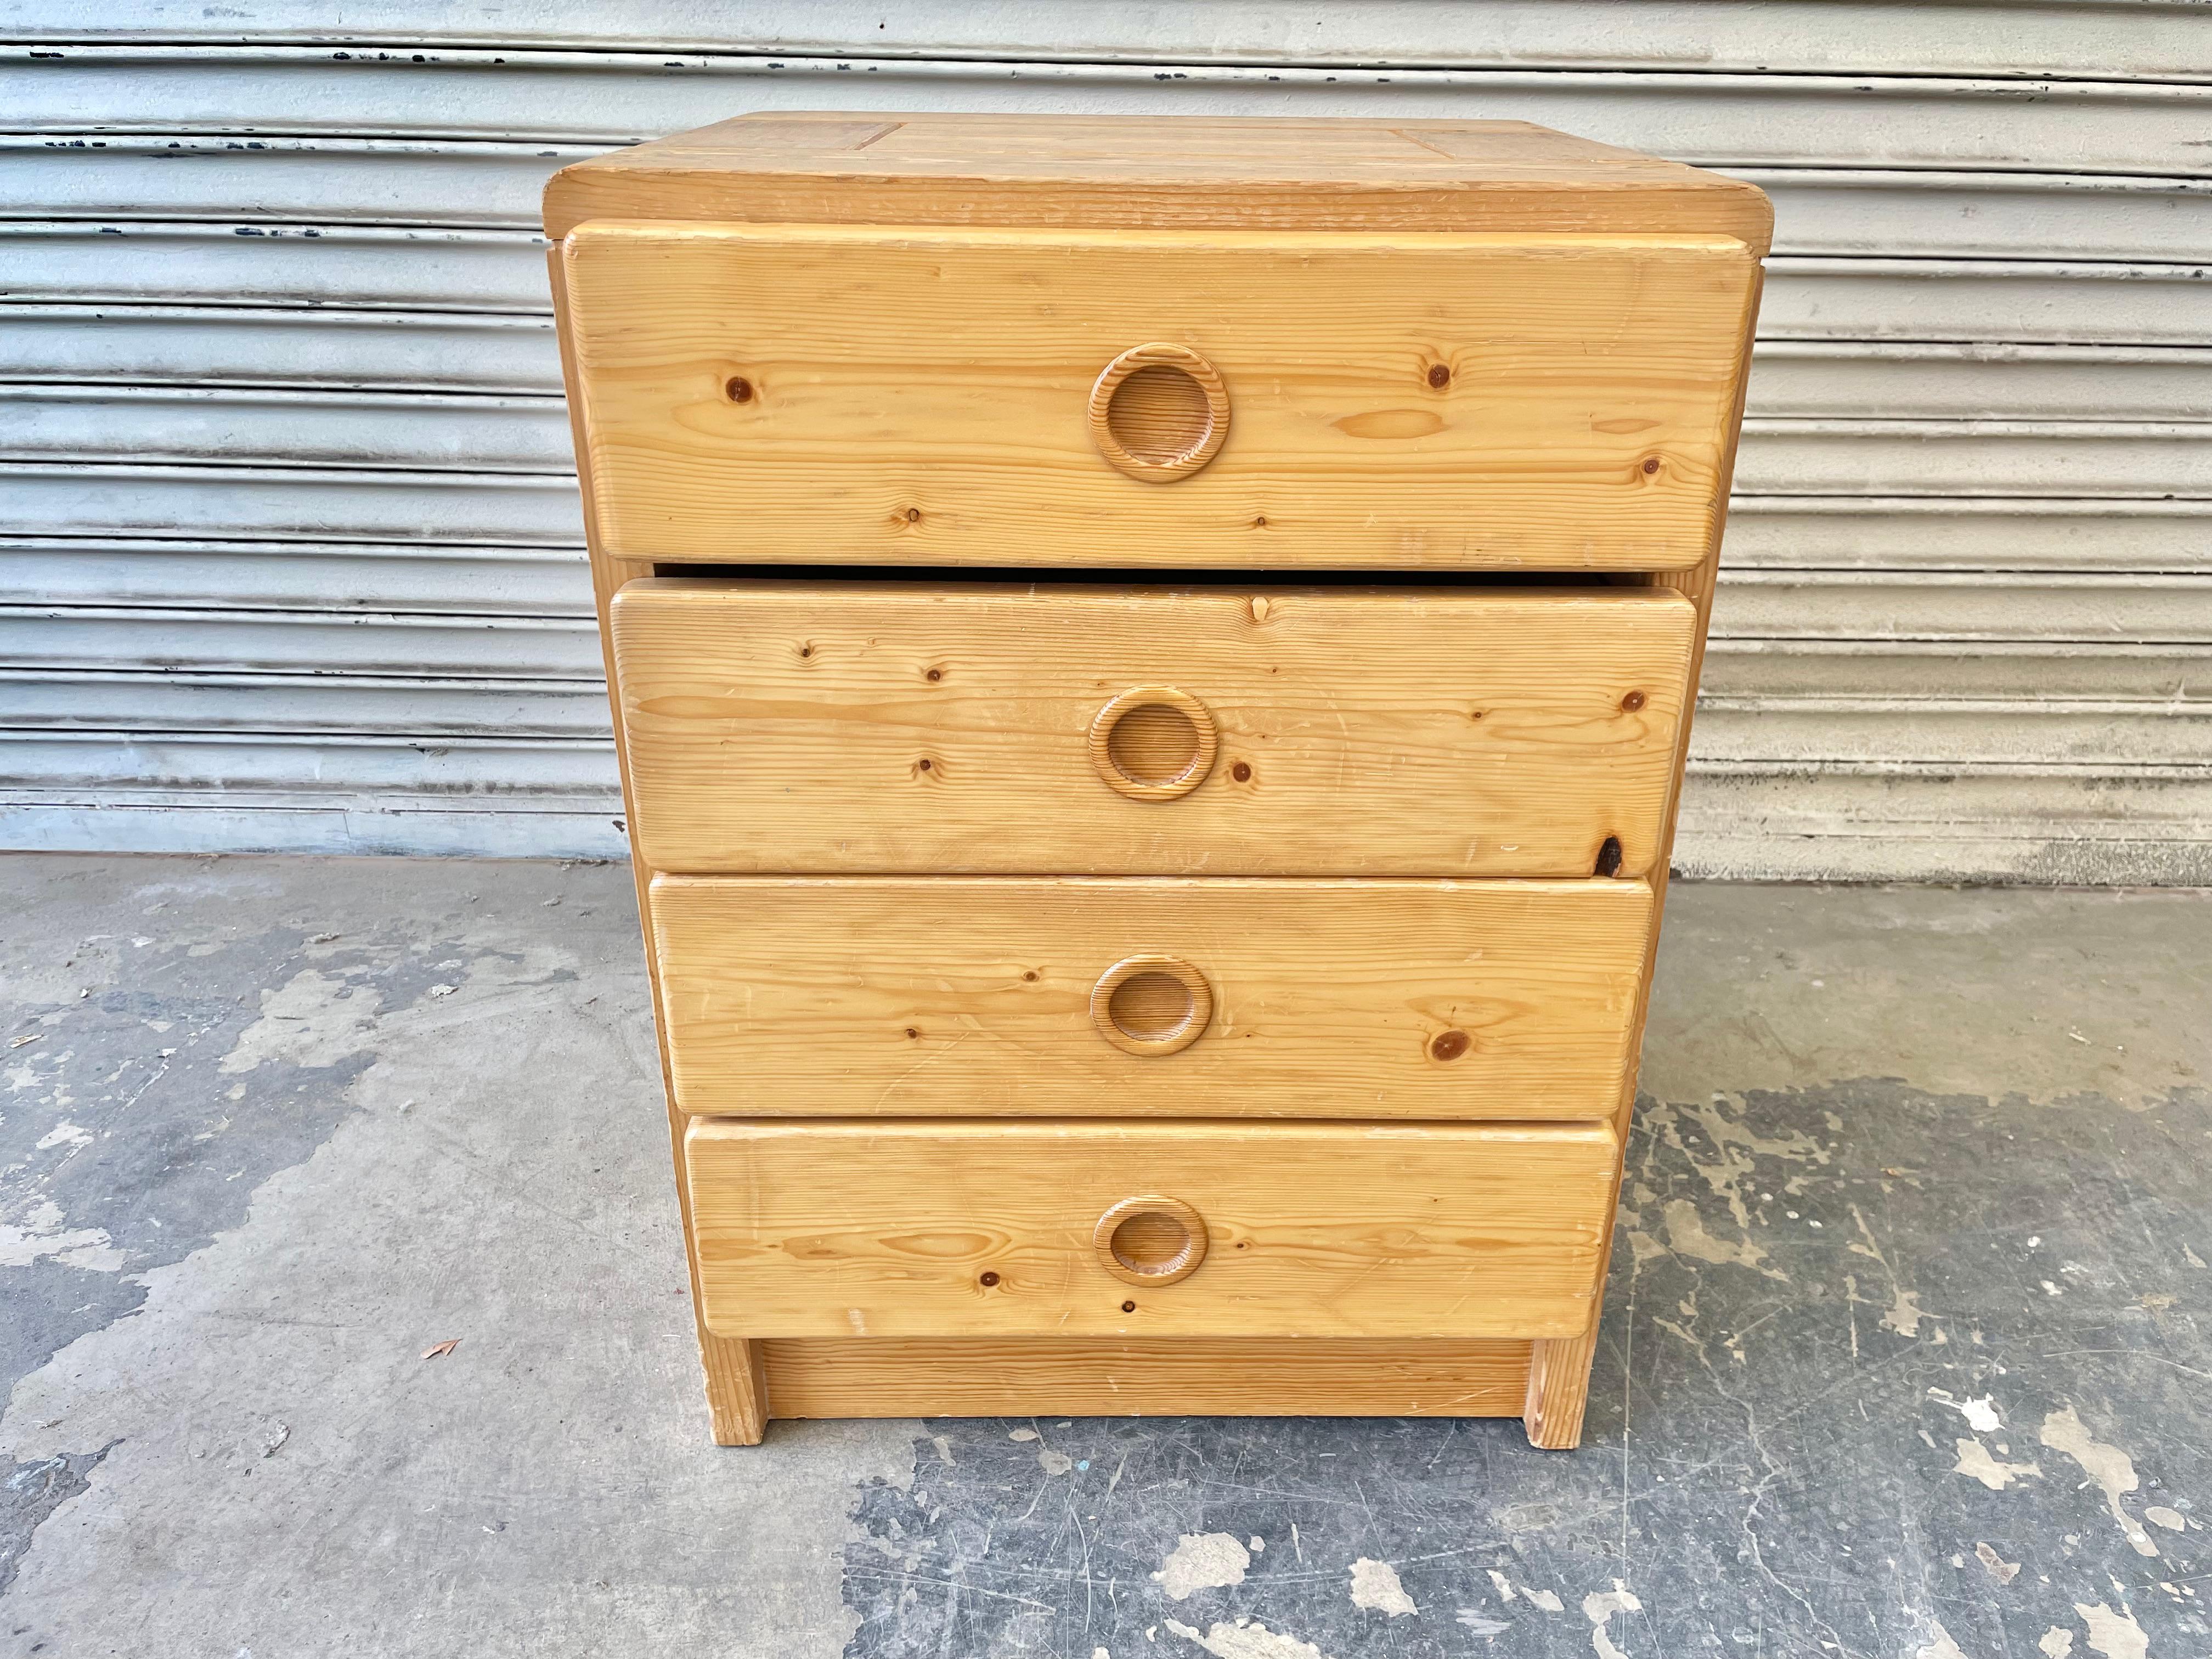 Pine chest of drawers by Charlotte Perriand for Les Arcs. 4 pull out drawers. Made of solid pine, circa 1960. Good original condition. Fun piece of collectible design from the popular French ski resort. 3 available. Priced individually. 

